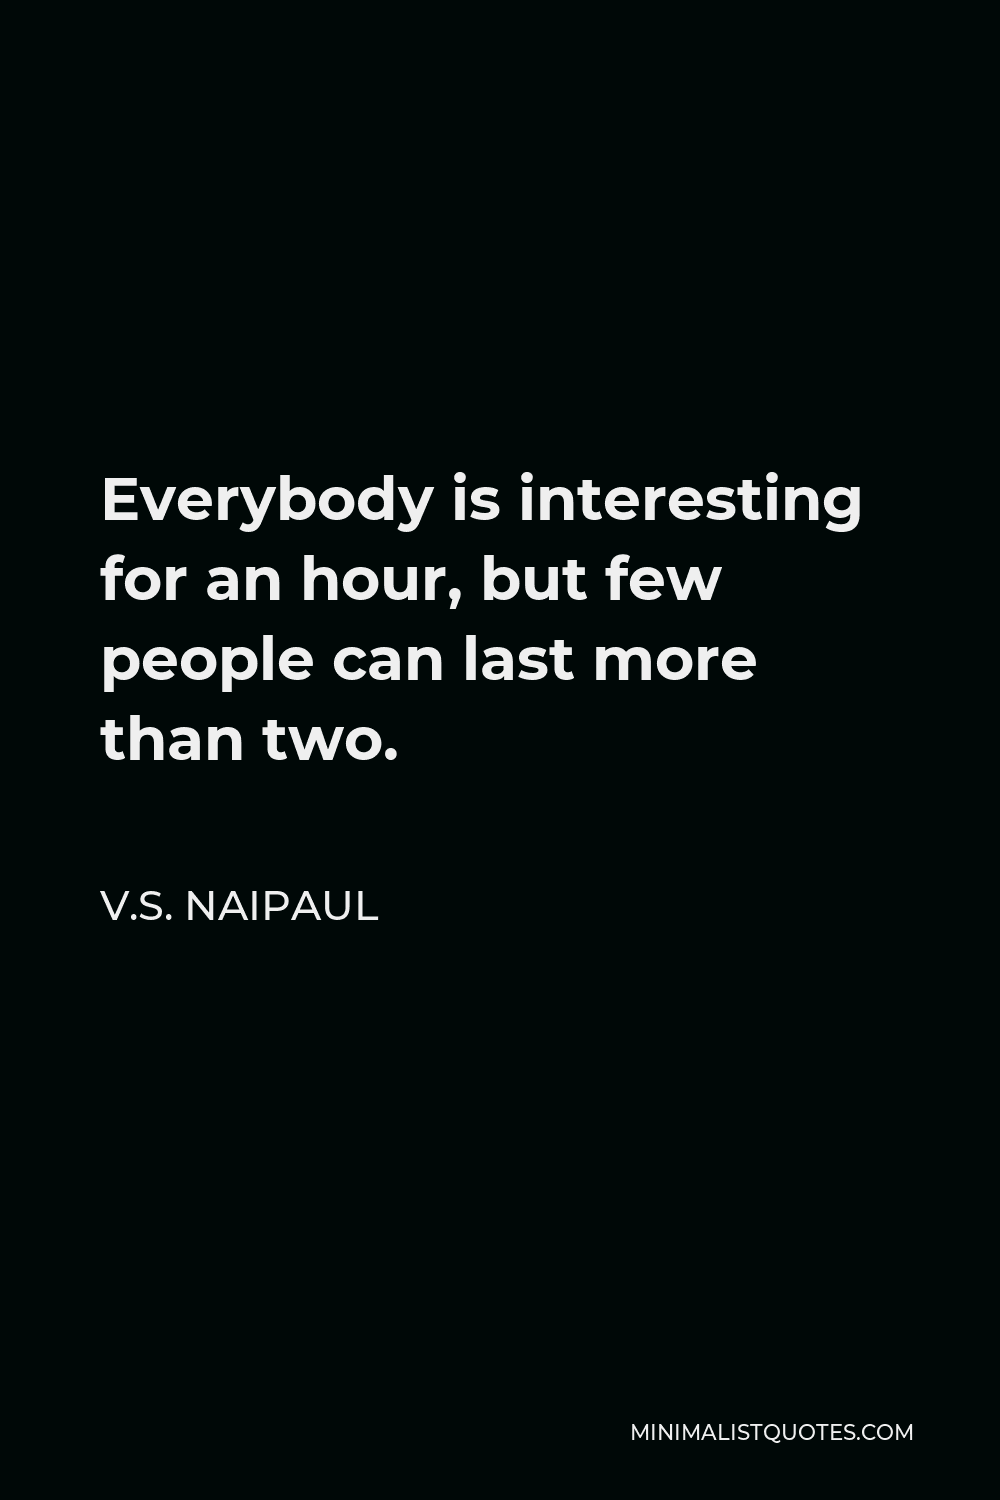 V.S. Naipaul Quote - Everybody is interesting for an hour, but few people can last more than two.